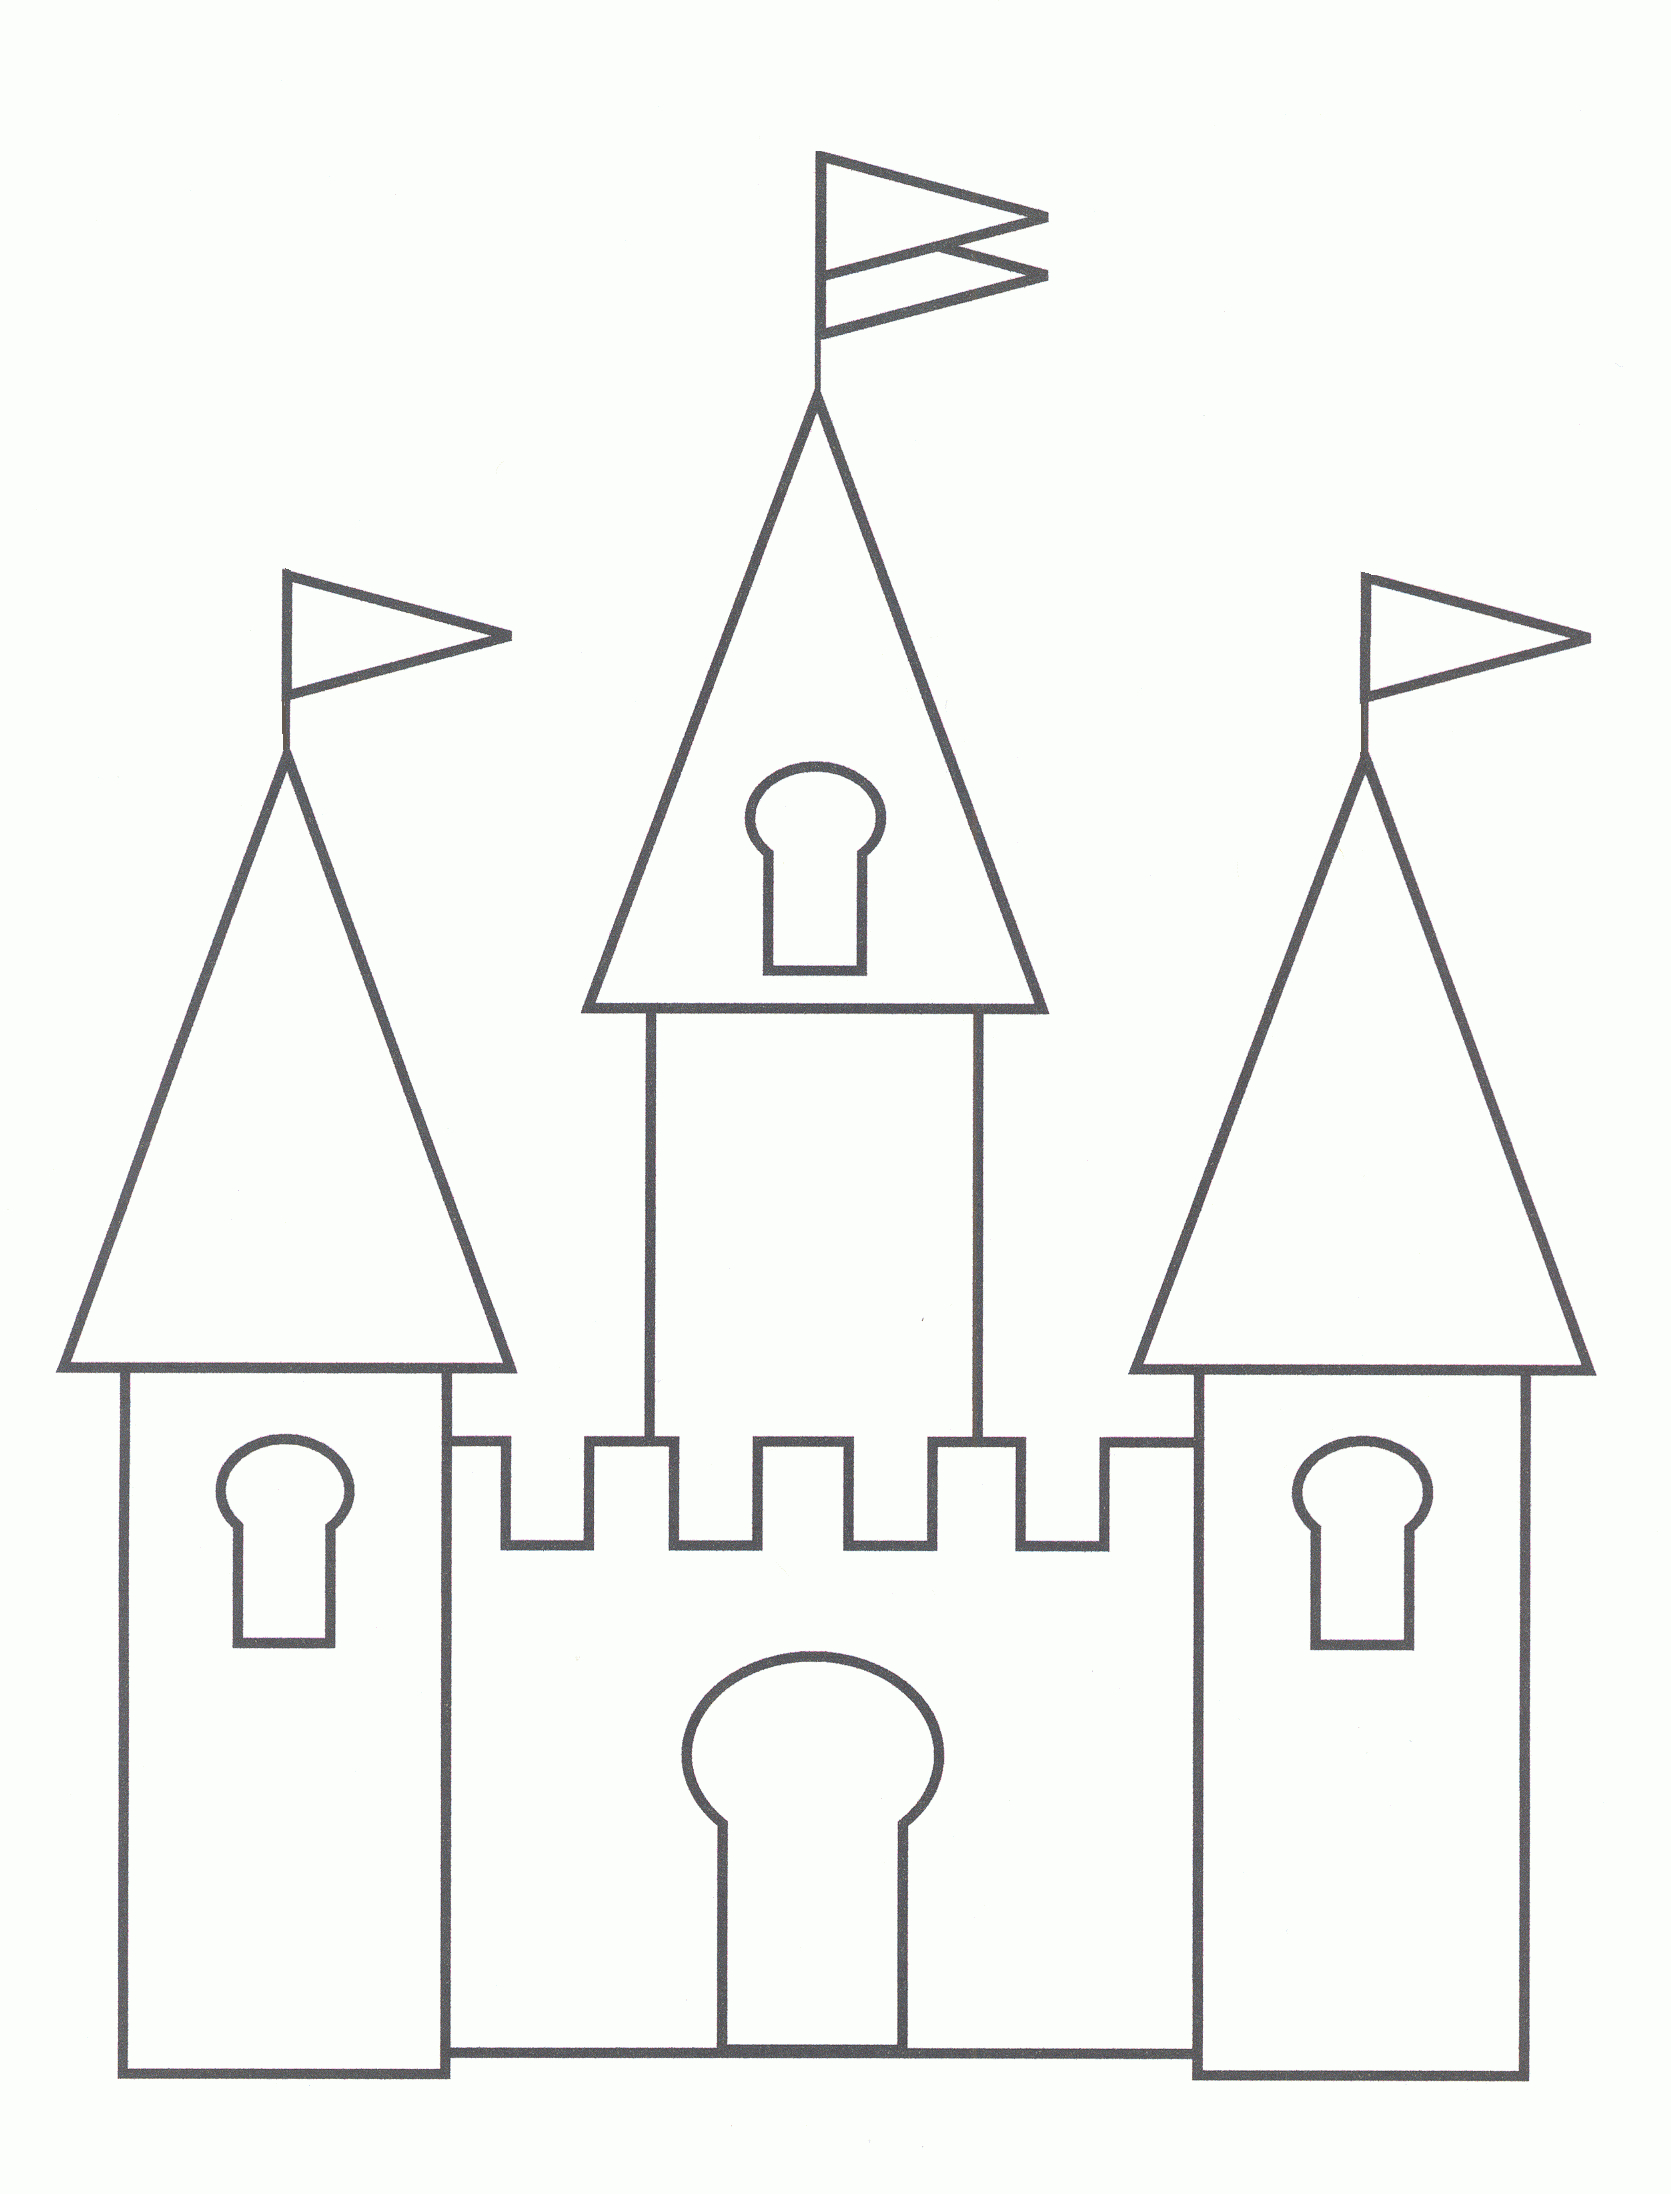 Free Printable Castle Coloring Pages For Kids | Princess | Castle - Free Printable Castle Templates